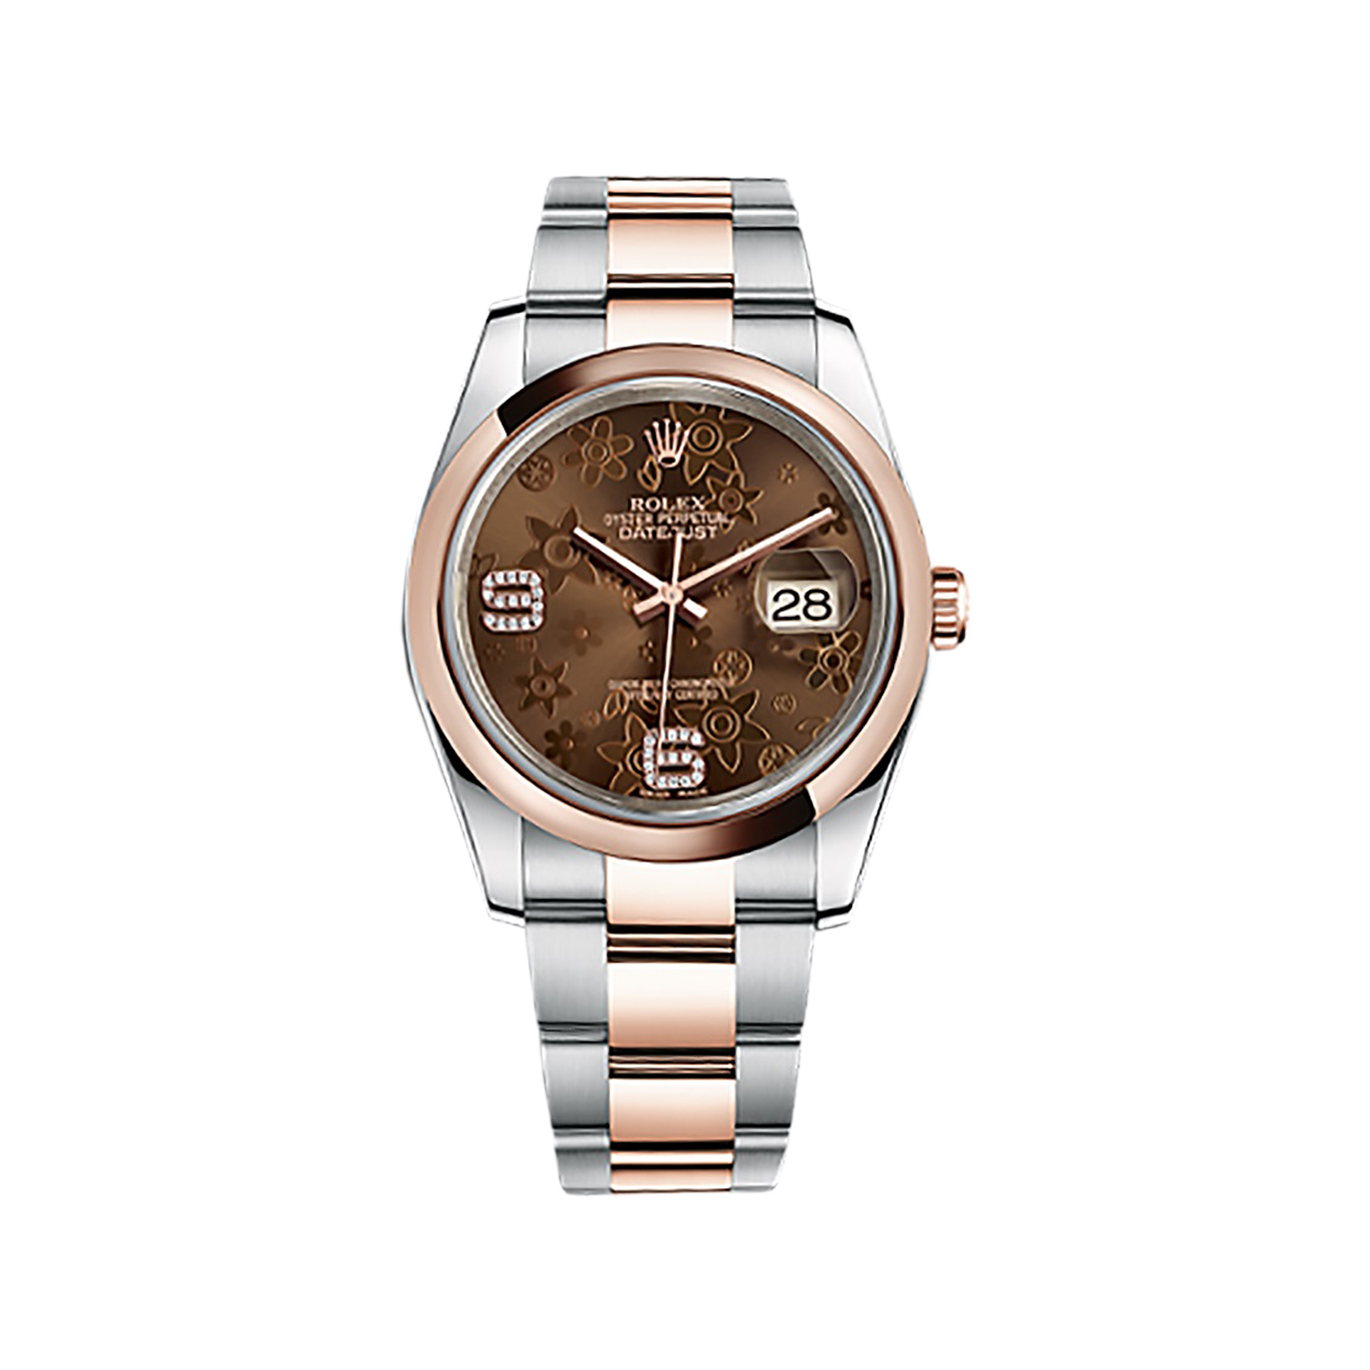 Datejust 36 116201 Rose Gold & Stainless Steel Watch (Chocolate Floral Motif Set with Diamonds)